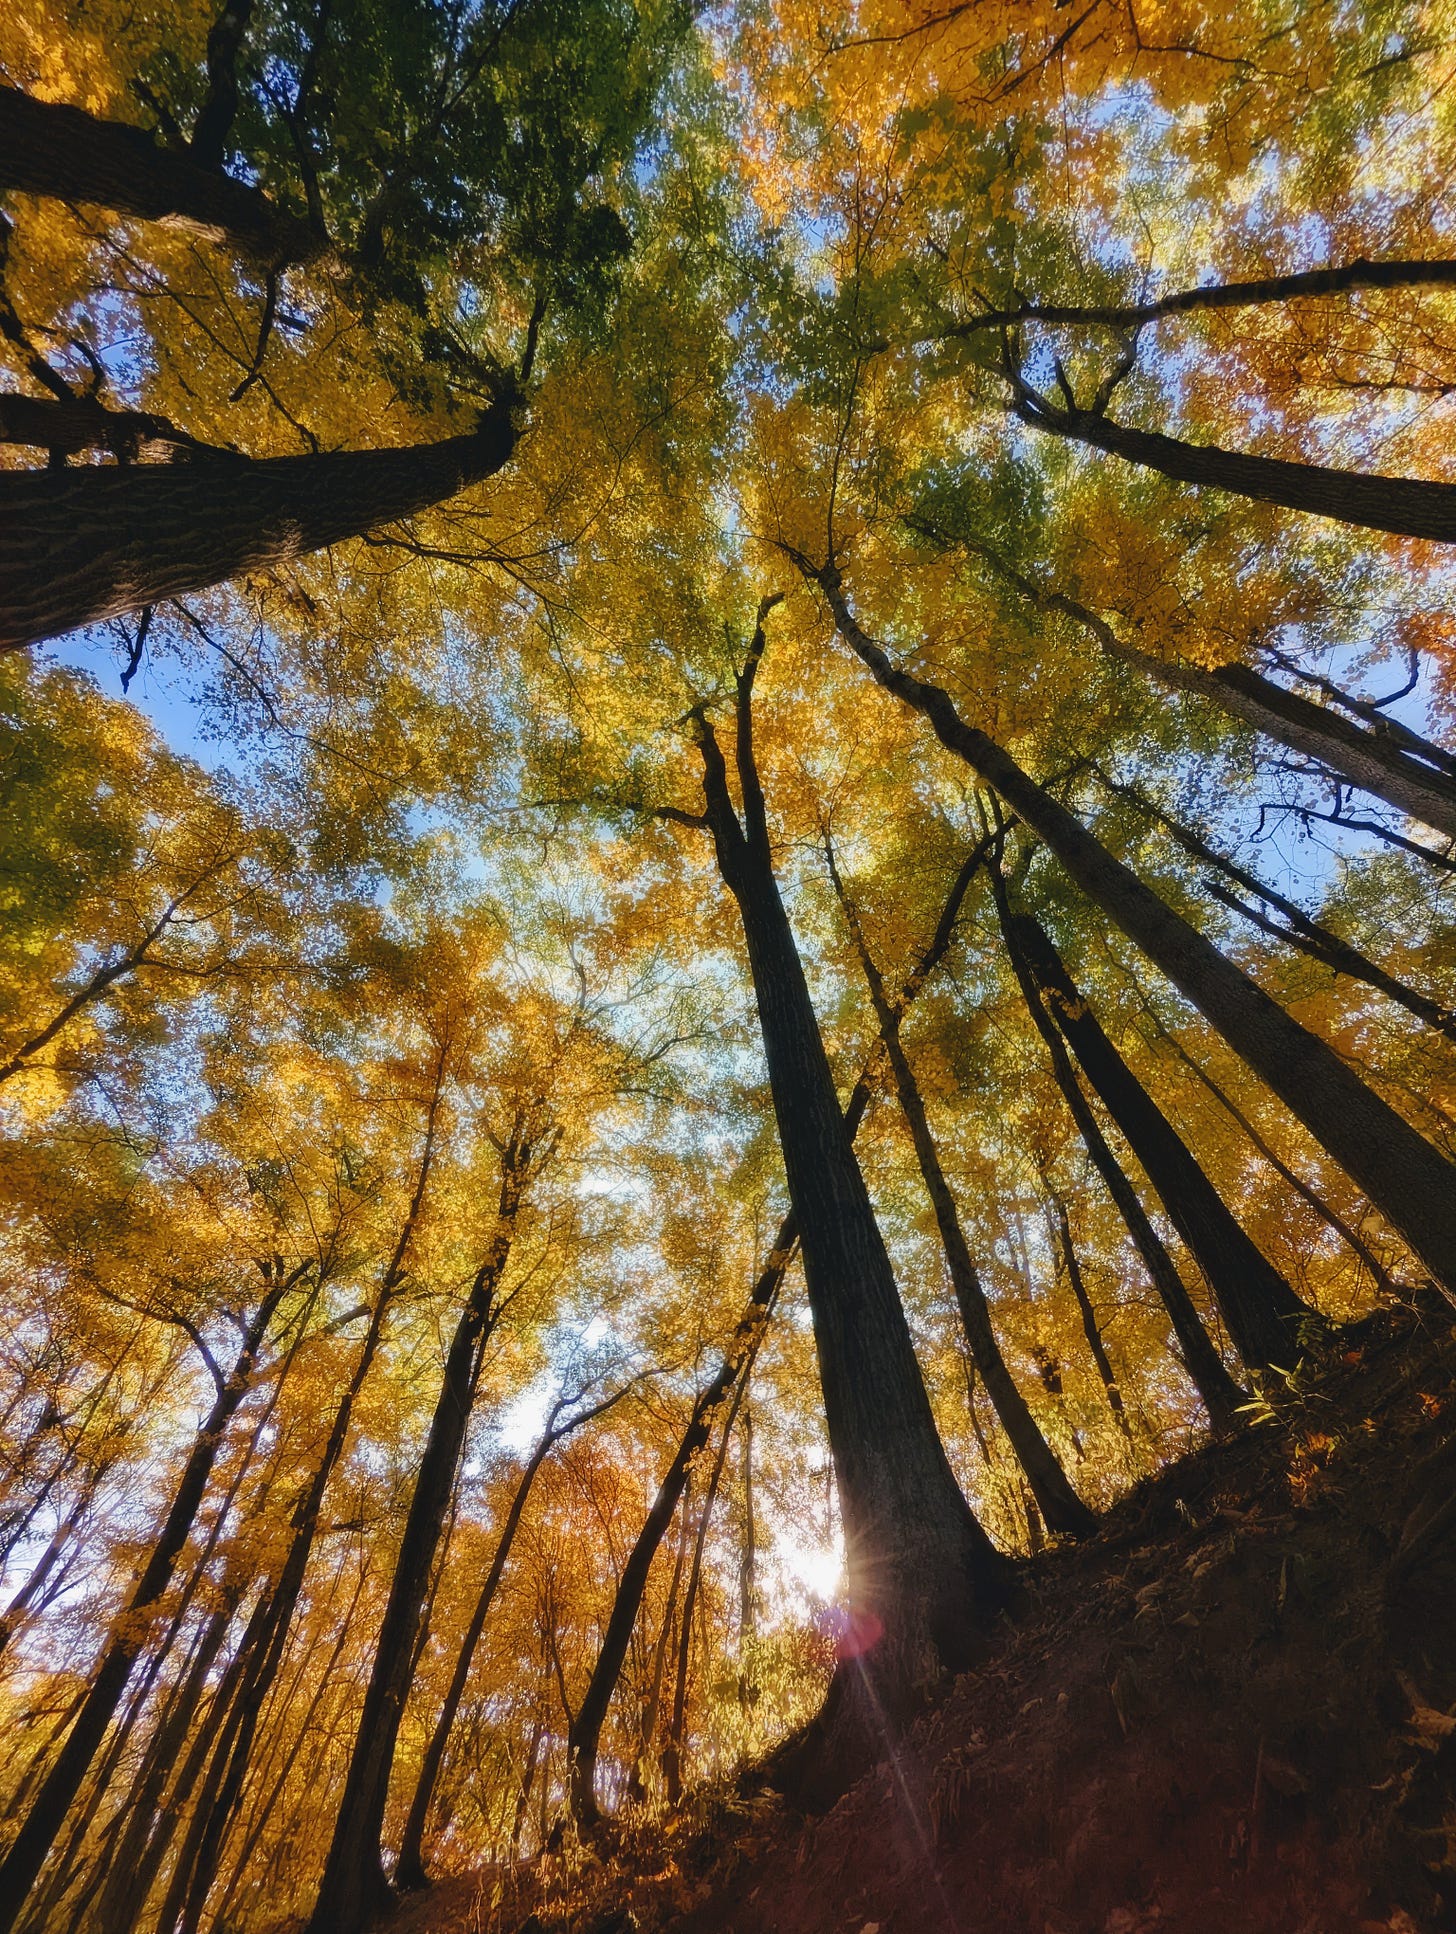 Looking straight up from the middle of a forest, dark trunks lead up to green and yellow leaves that almost look airbrushed on a canvas of blue sky.